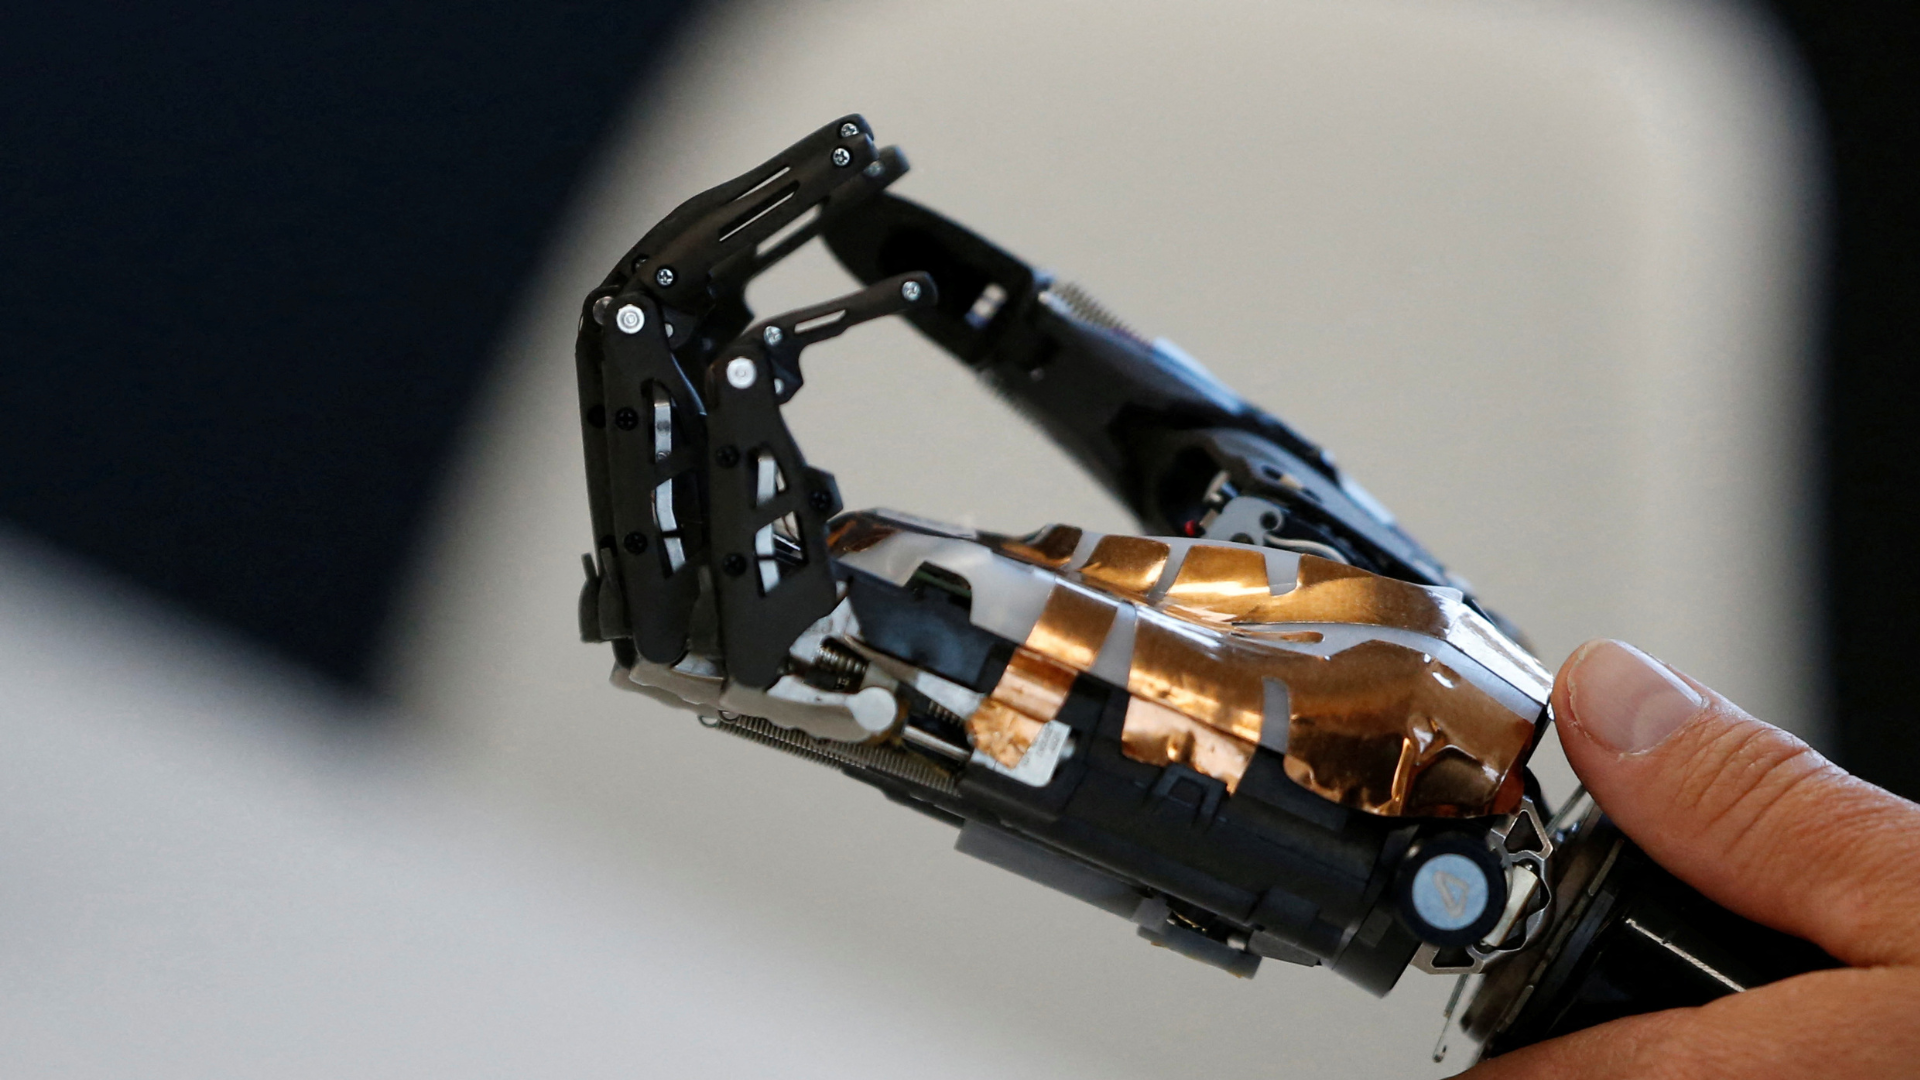 A person holds a bionic hand developed by COVVI, at Quayside Business Park in Leeds, Britain August 11, 2022. REUTERS/Craig Brough